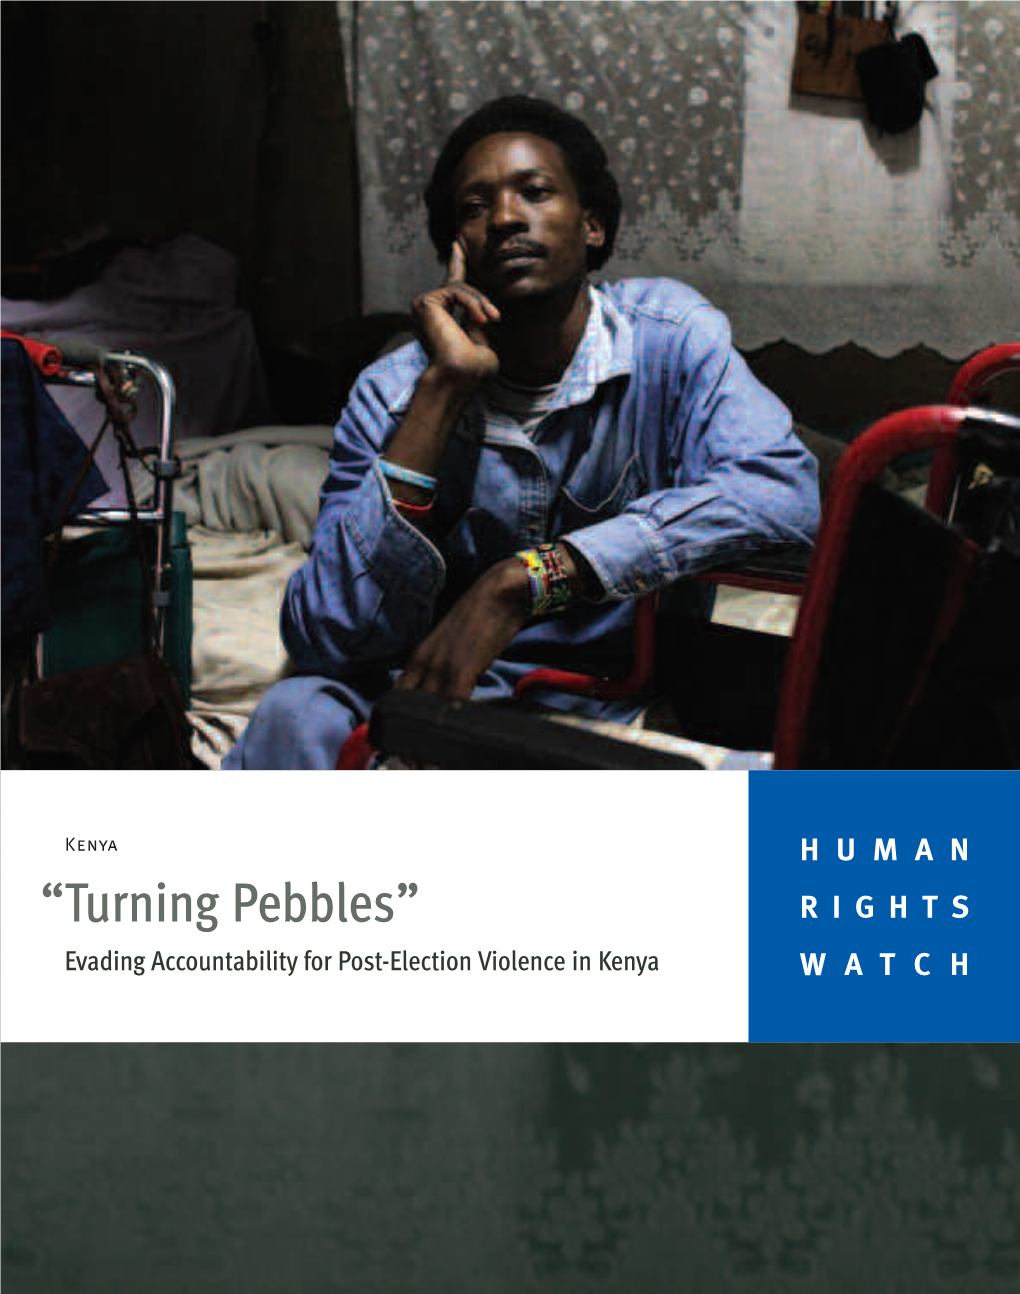 Evading Accountability for Post-Election Violence in Kenya WATCH